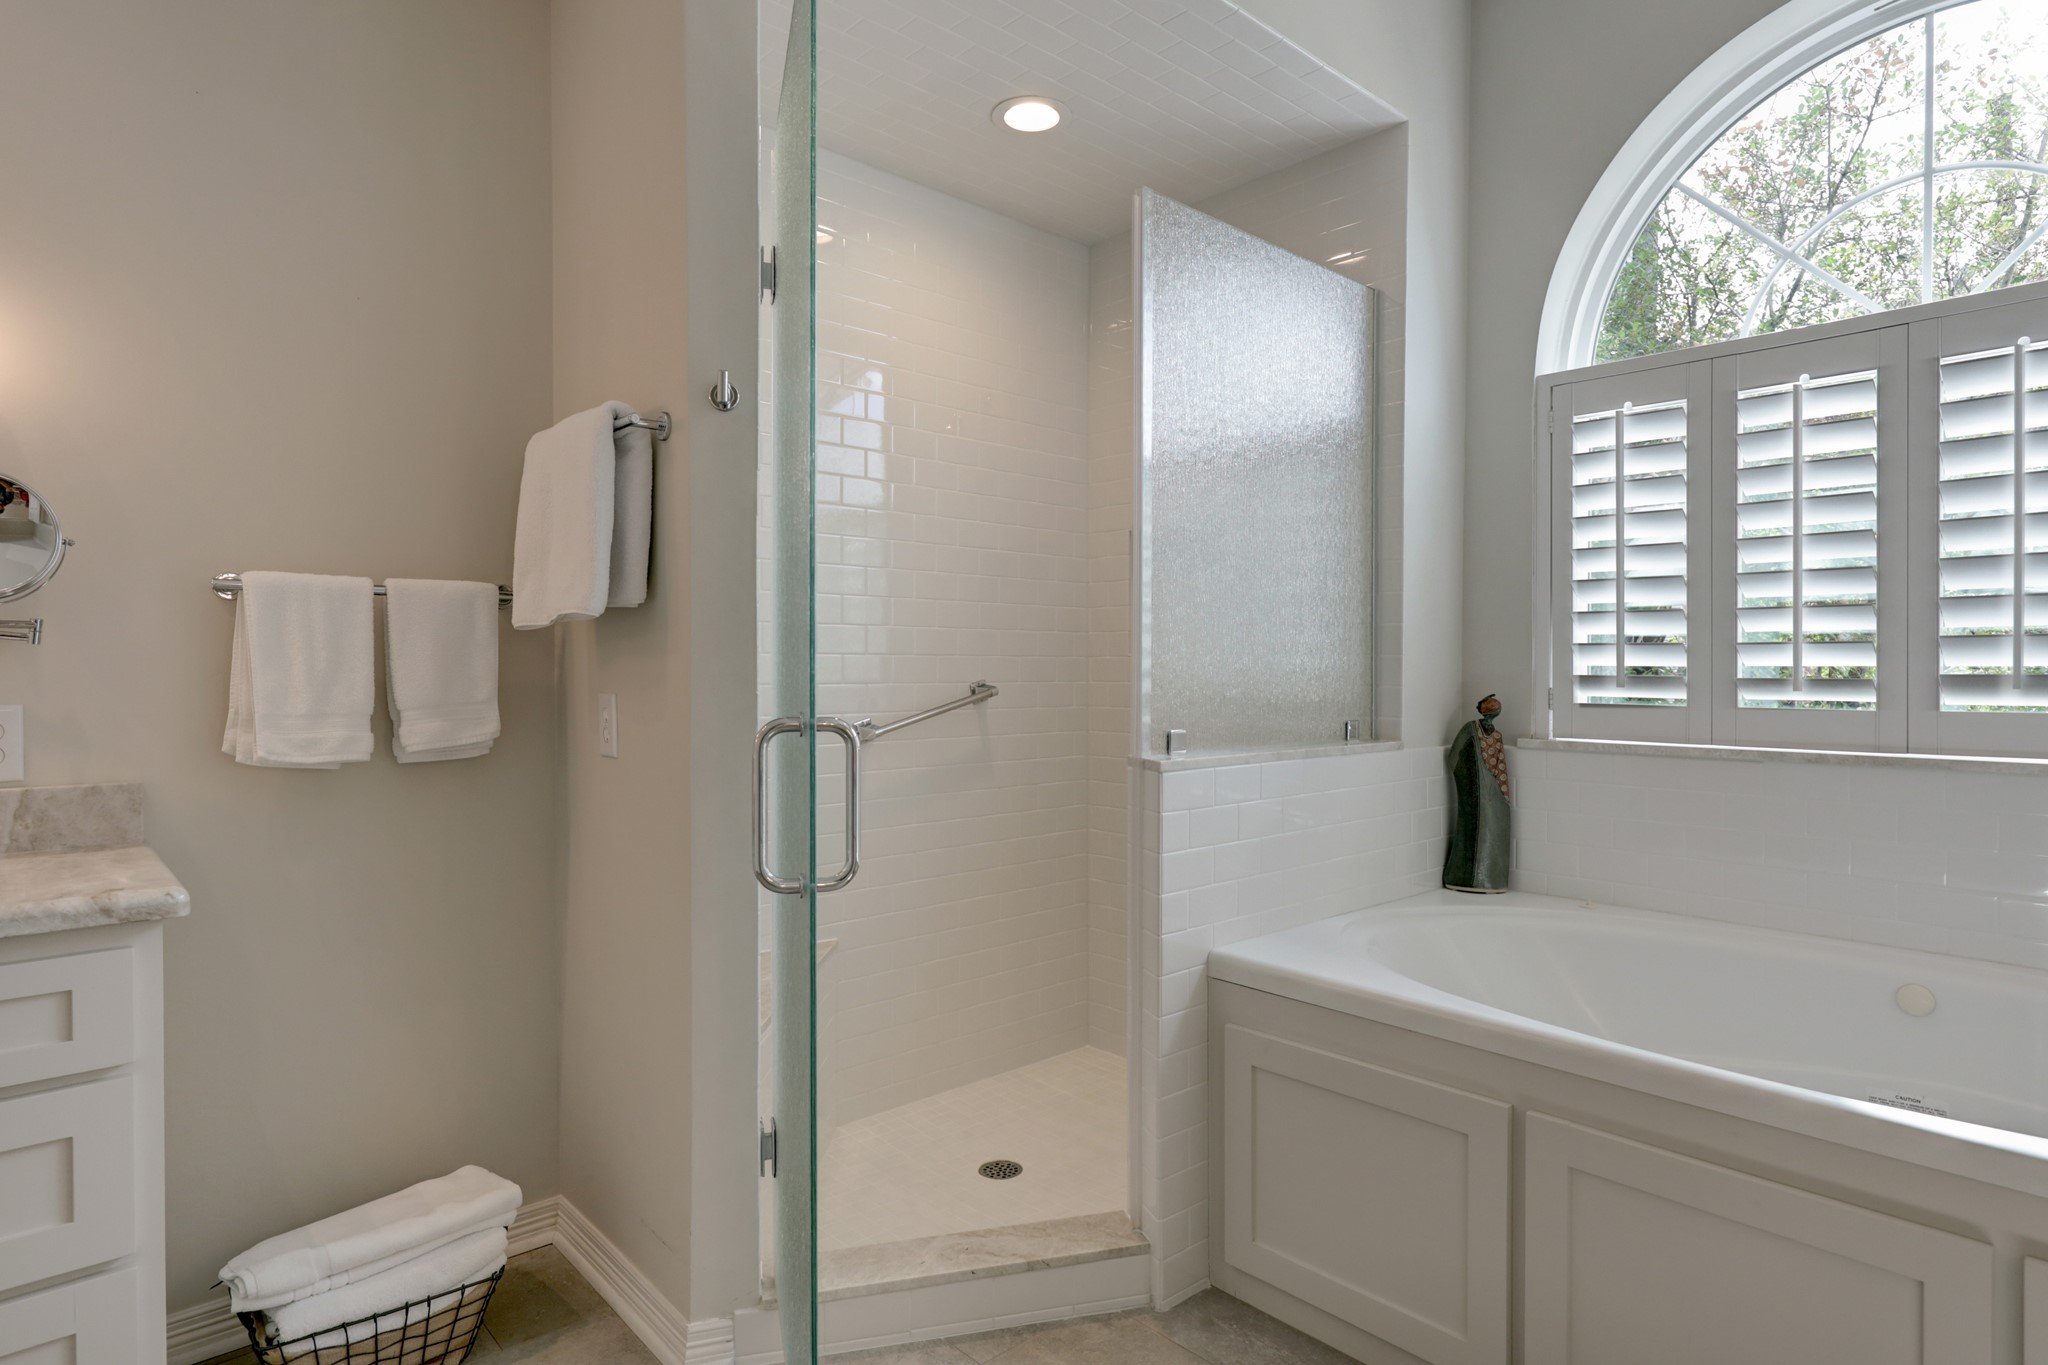 Notice the white subway tile surround and the elegant etched glass in the shower.